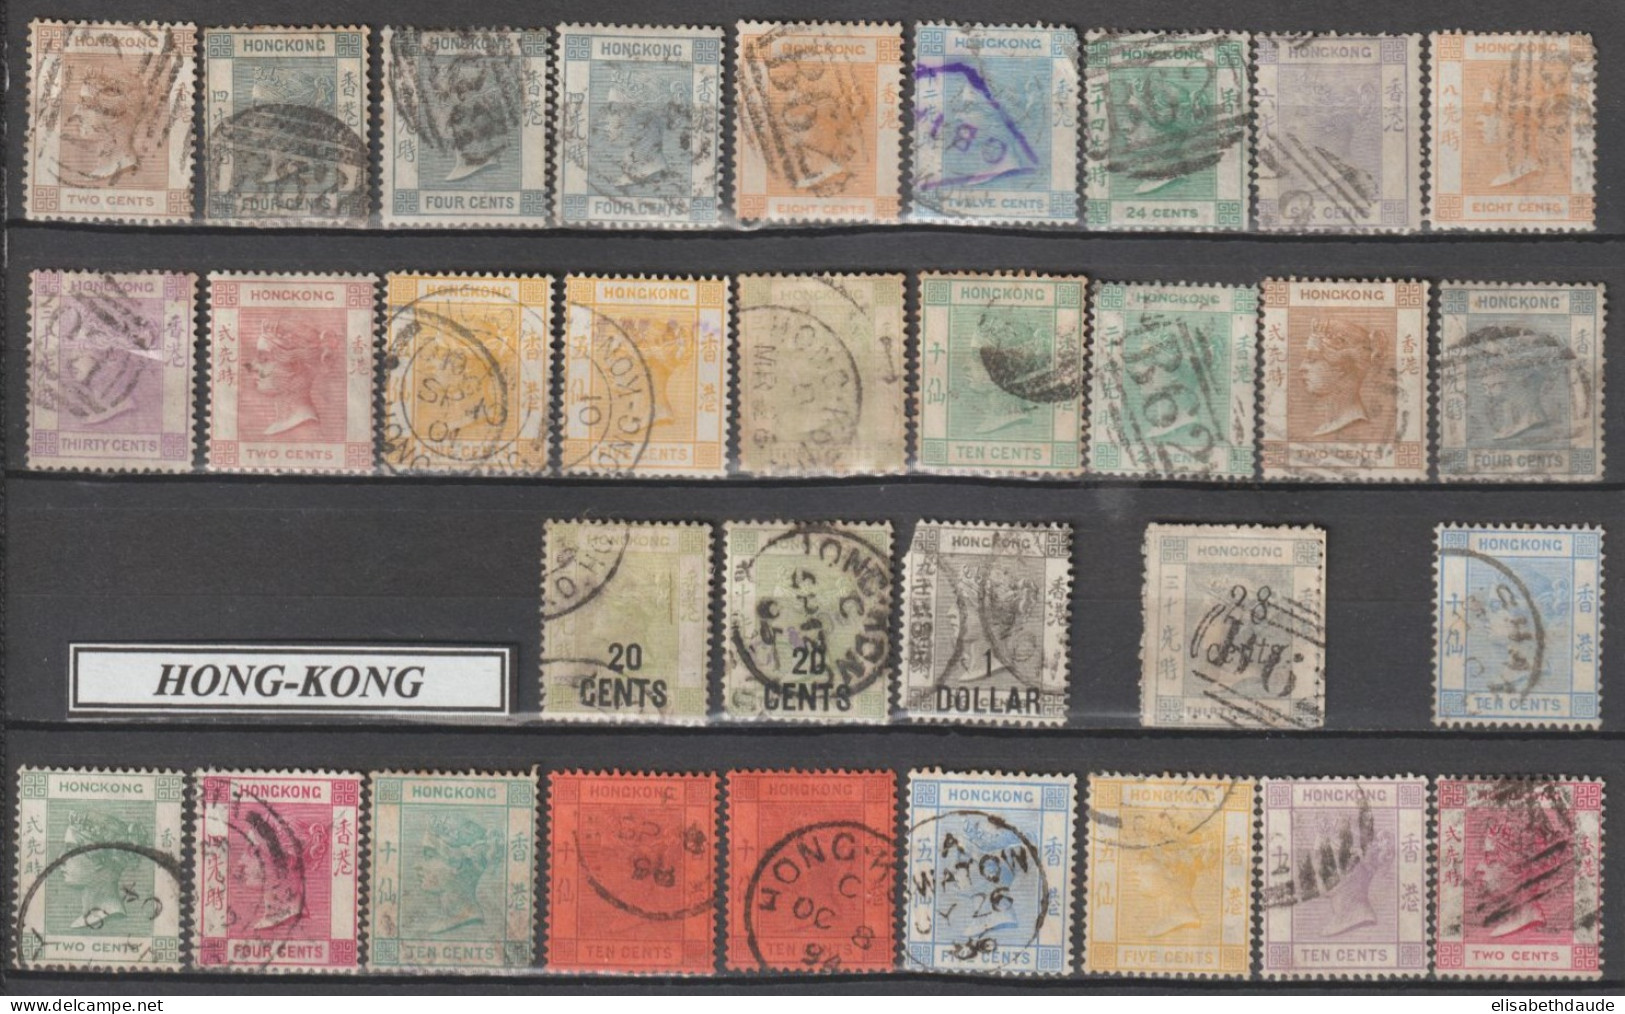 HONG KONG (CHINA) - VICTORIA - JOLI LOT OBLITERES A ETUDIER (1 DOLLAR DEFECTUEUX) - Used Stamps